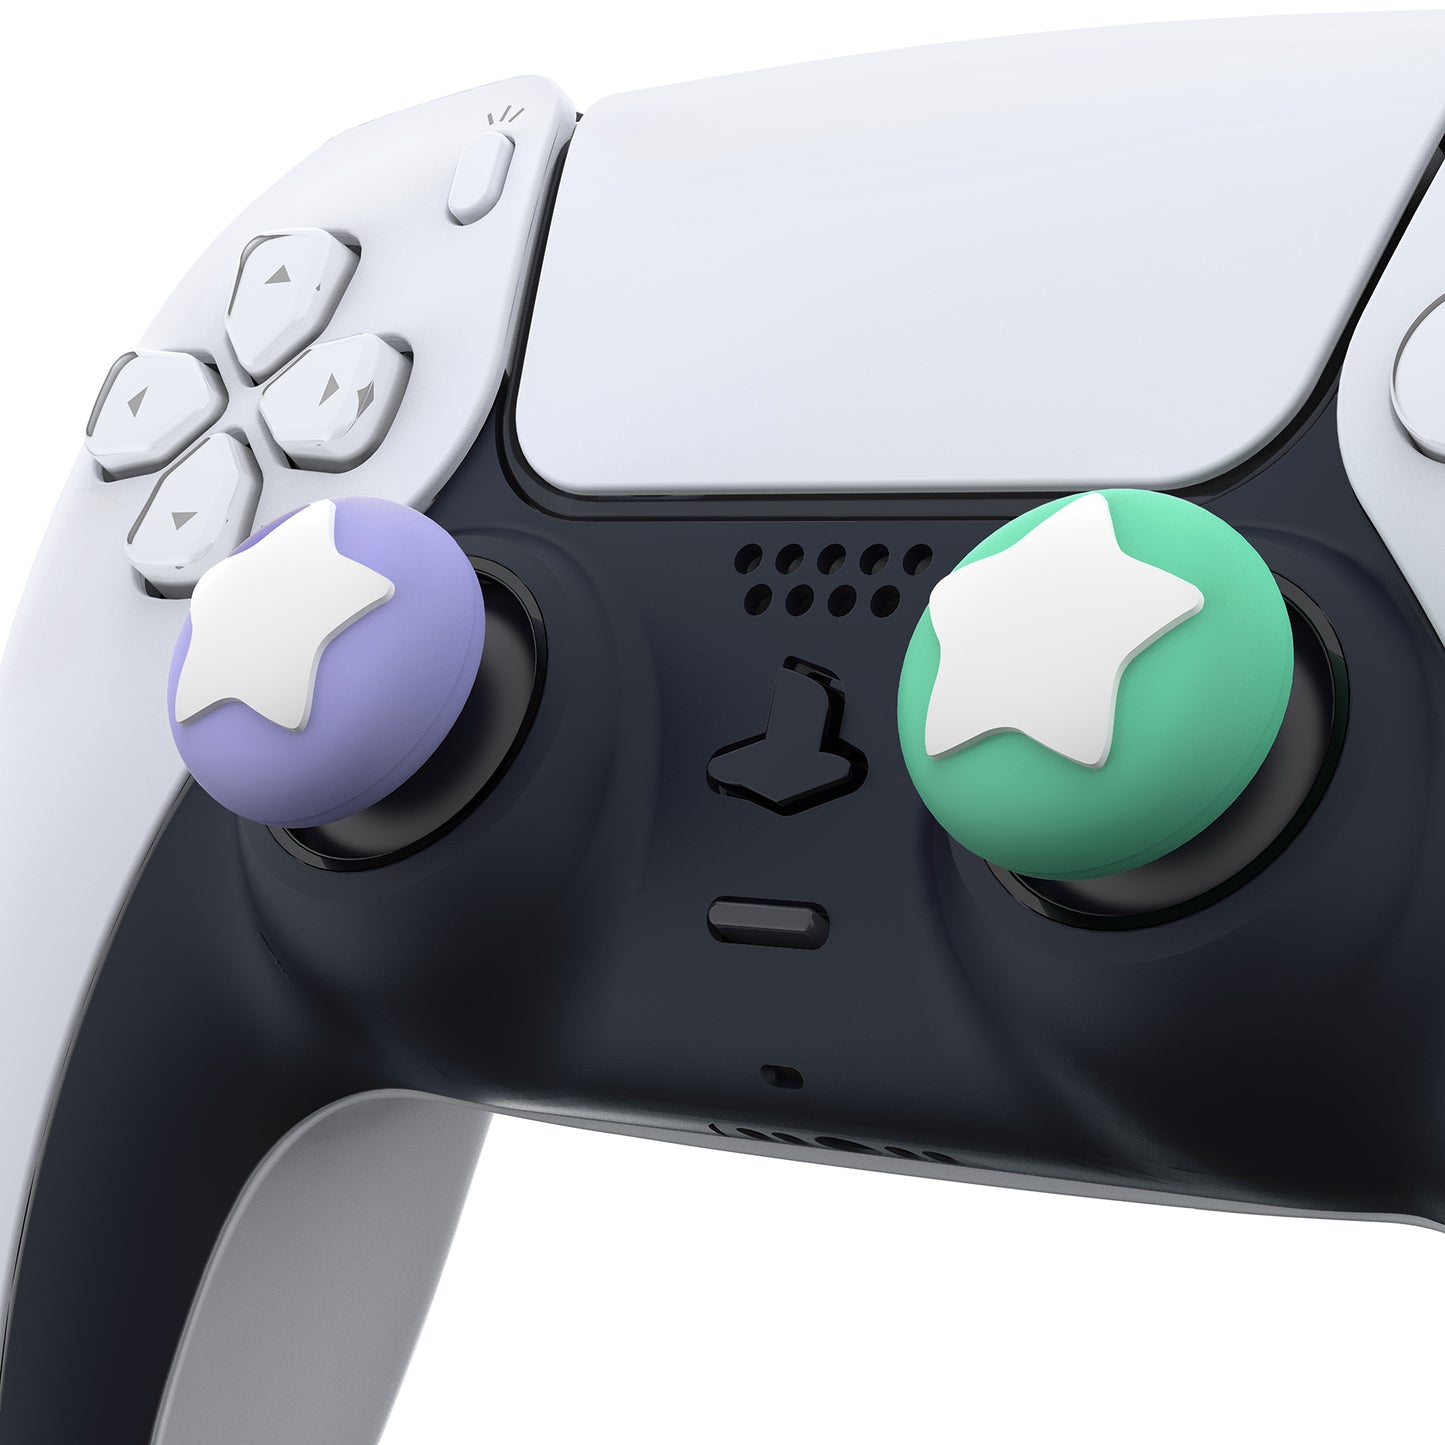 PlayVital Star Design Cute Thumb Grip Caps for ps5/4 Controller, Silicone Analog Stick Caps Cover for Xbox Series X/S, Thumbstick Caps for Switch Pro Controller - Mint Green & Light Violet - PJM3005 PlayVital